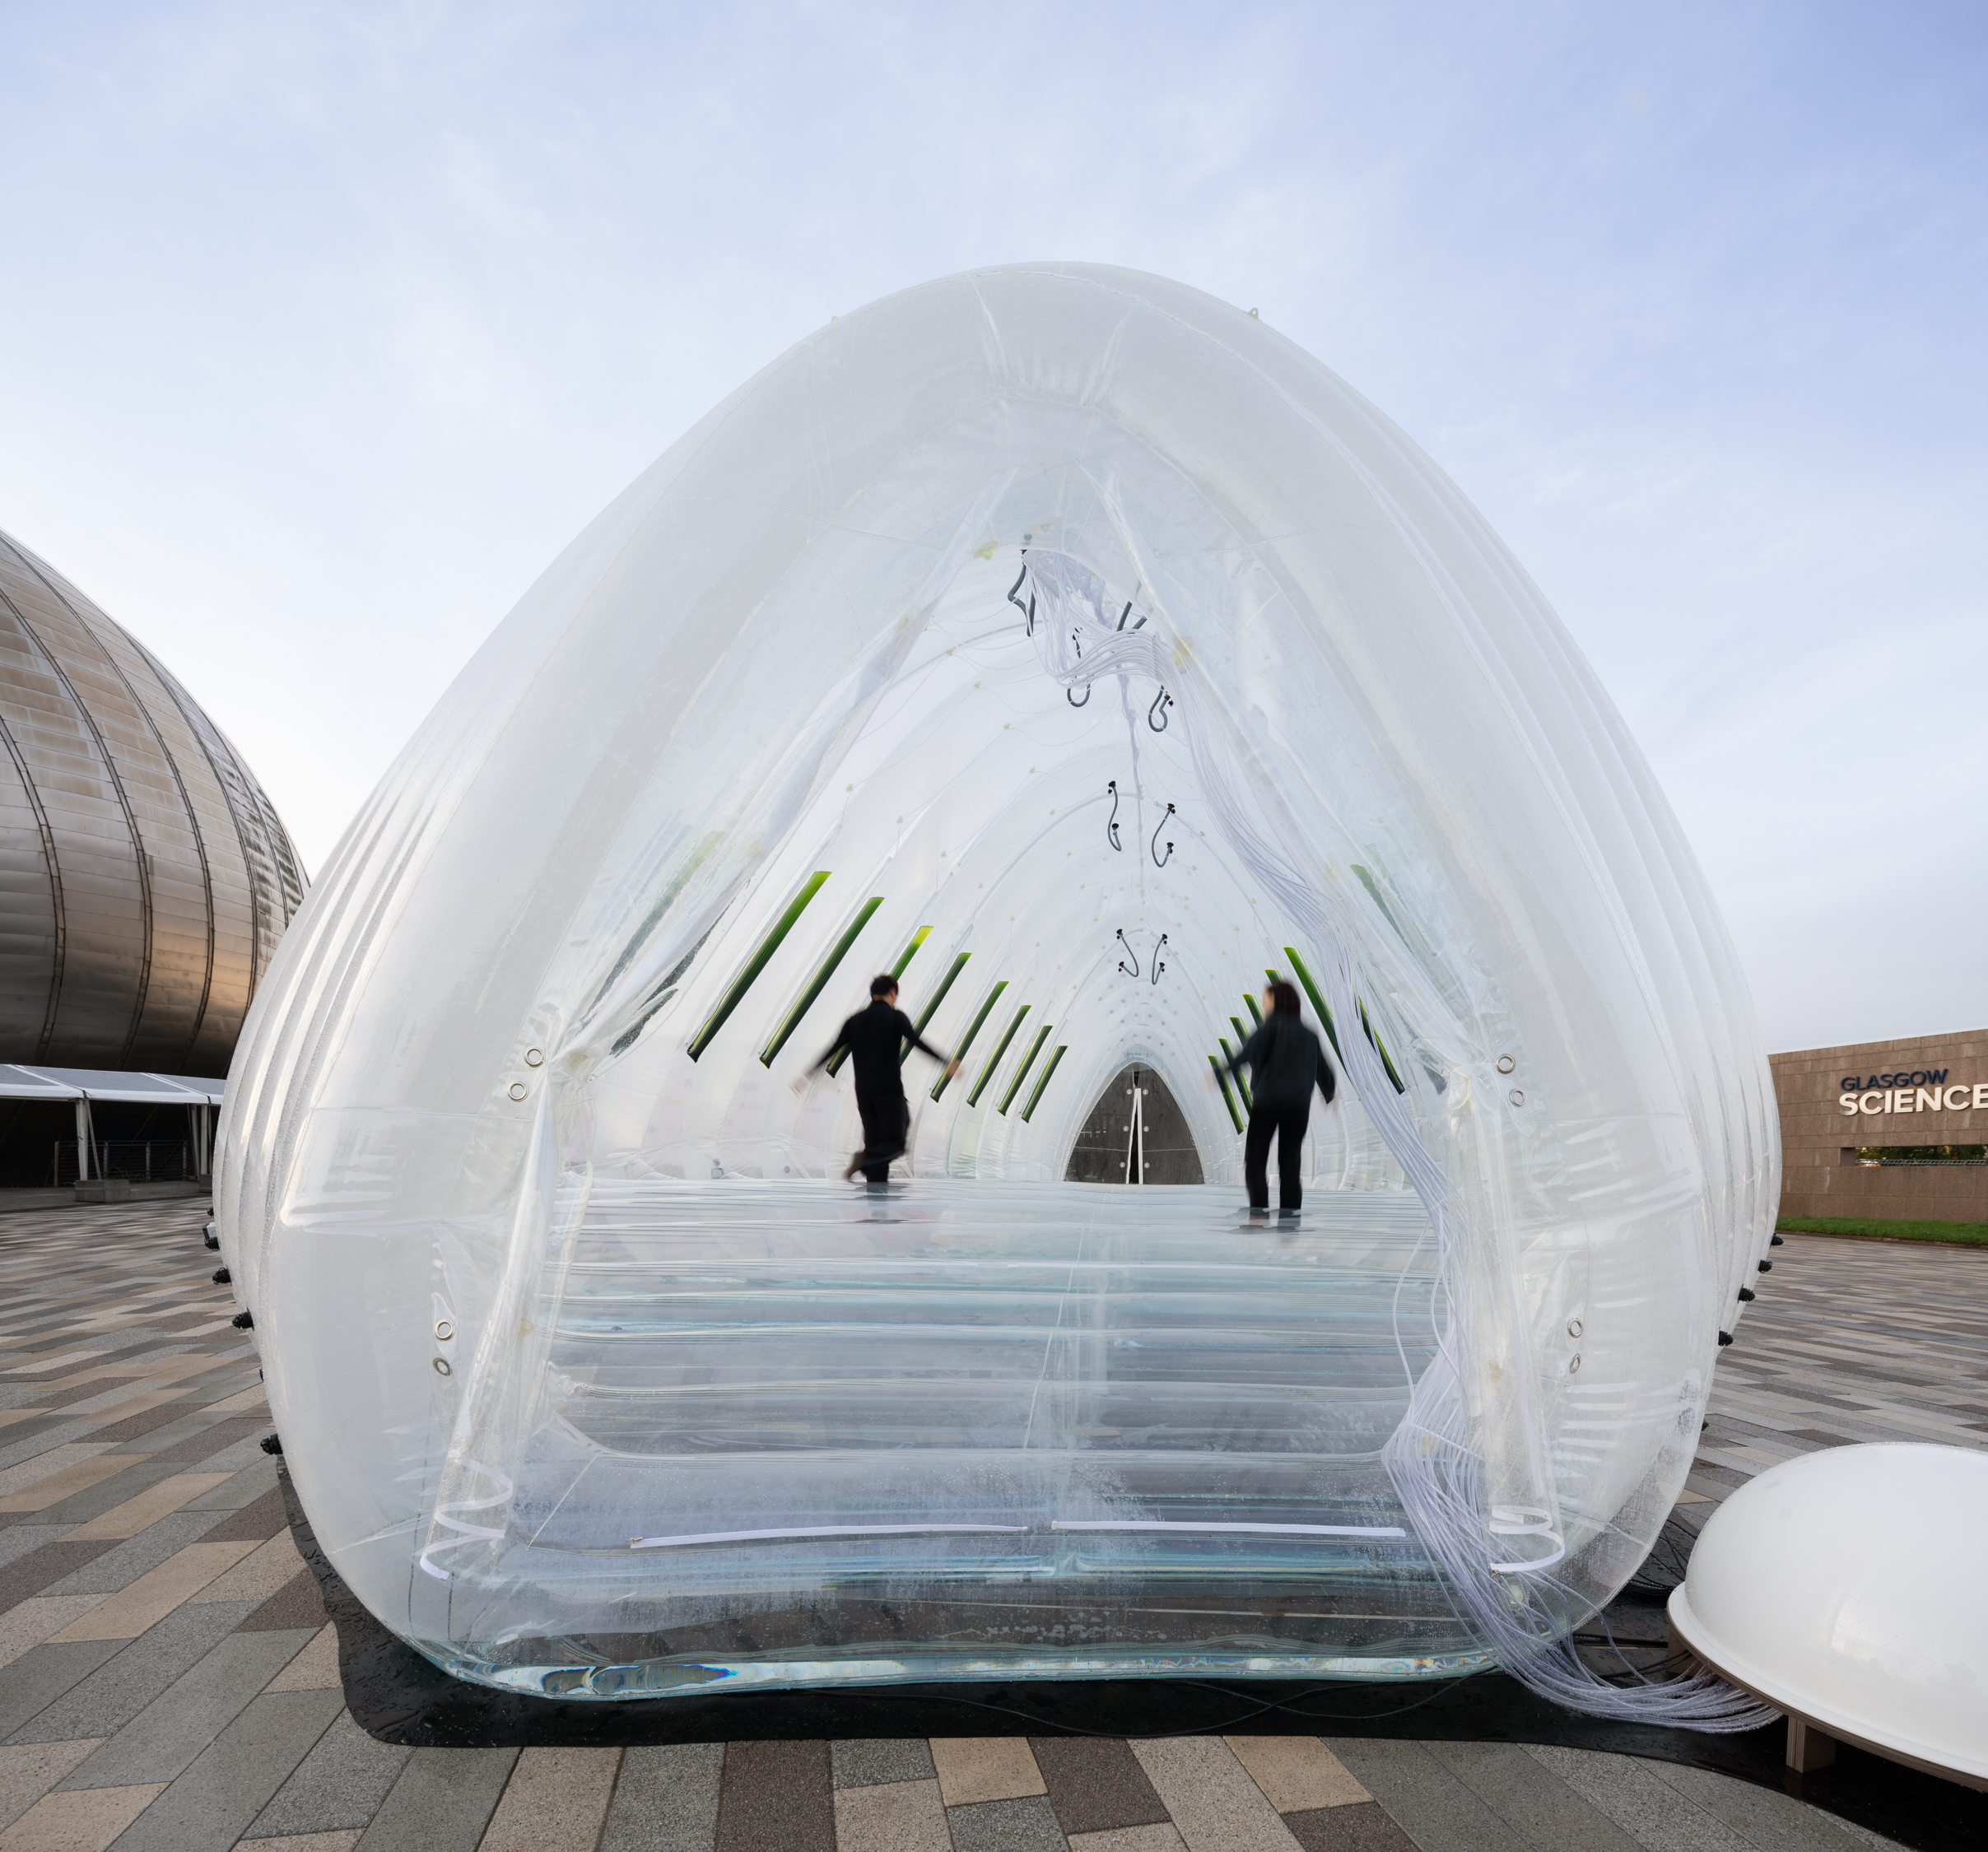 'Air Bubble air-purifying eco-machine' Is an Example of Infrastructure from Green Architecture